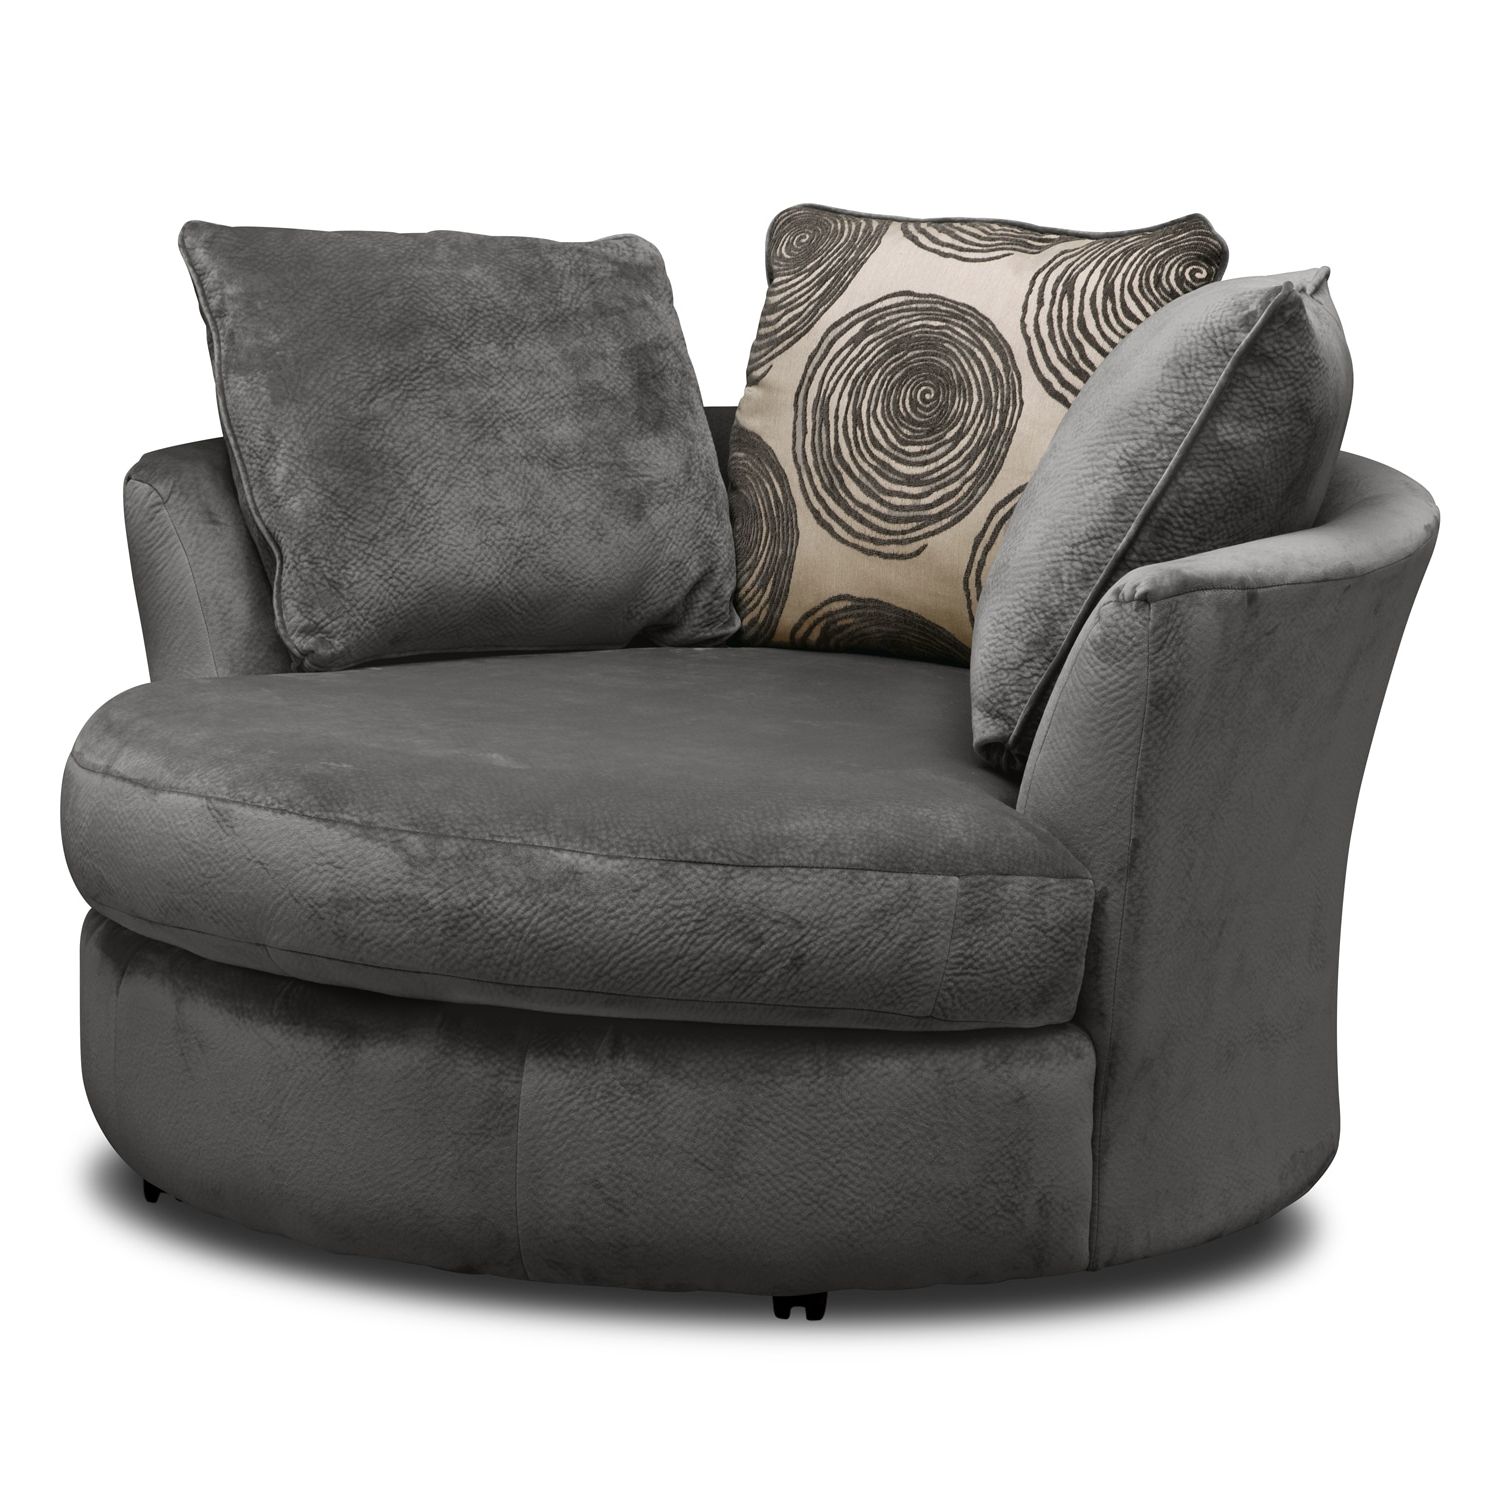 Value City Furniture And Mattresses In Best And Newest Sofa With Swivel Chair (View 3 of 20)